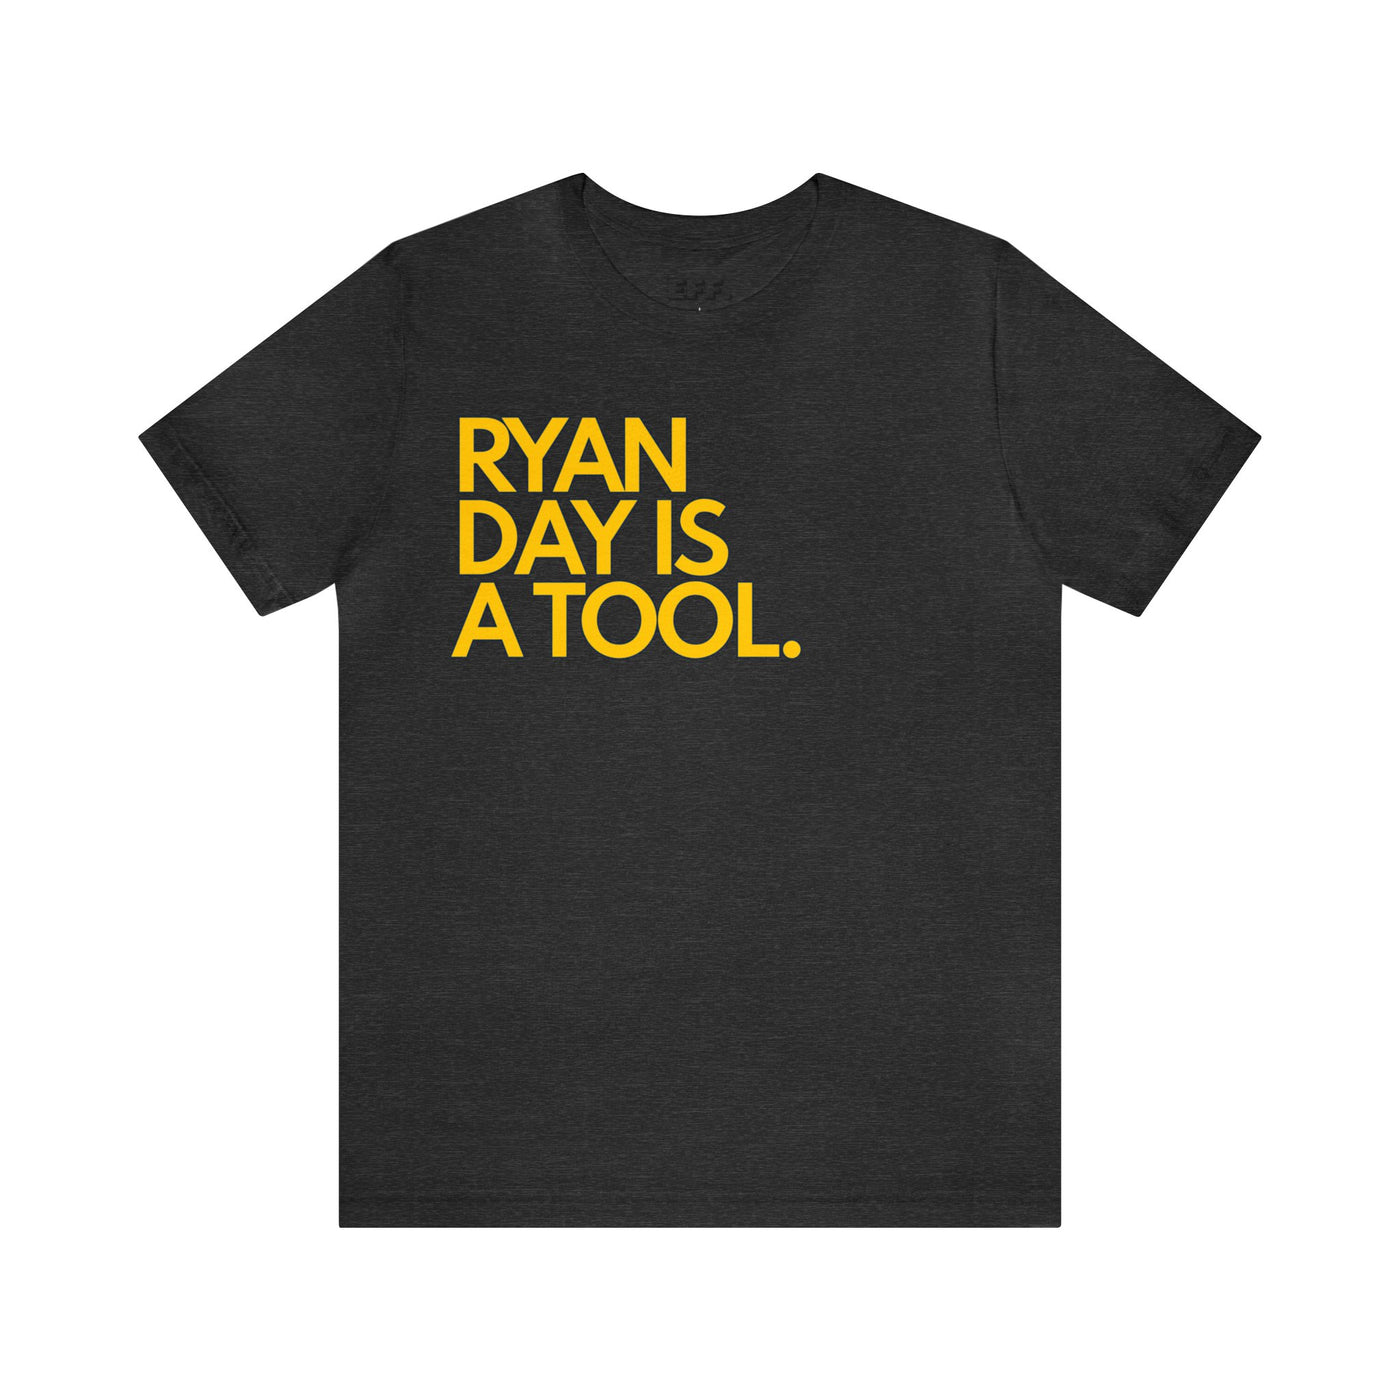 Ryan Day Is A Tool.